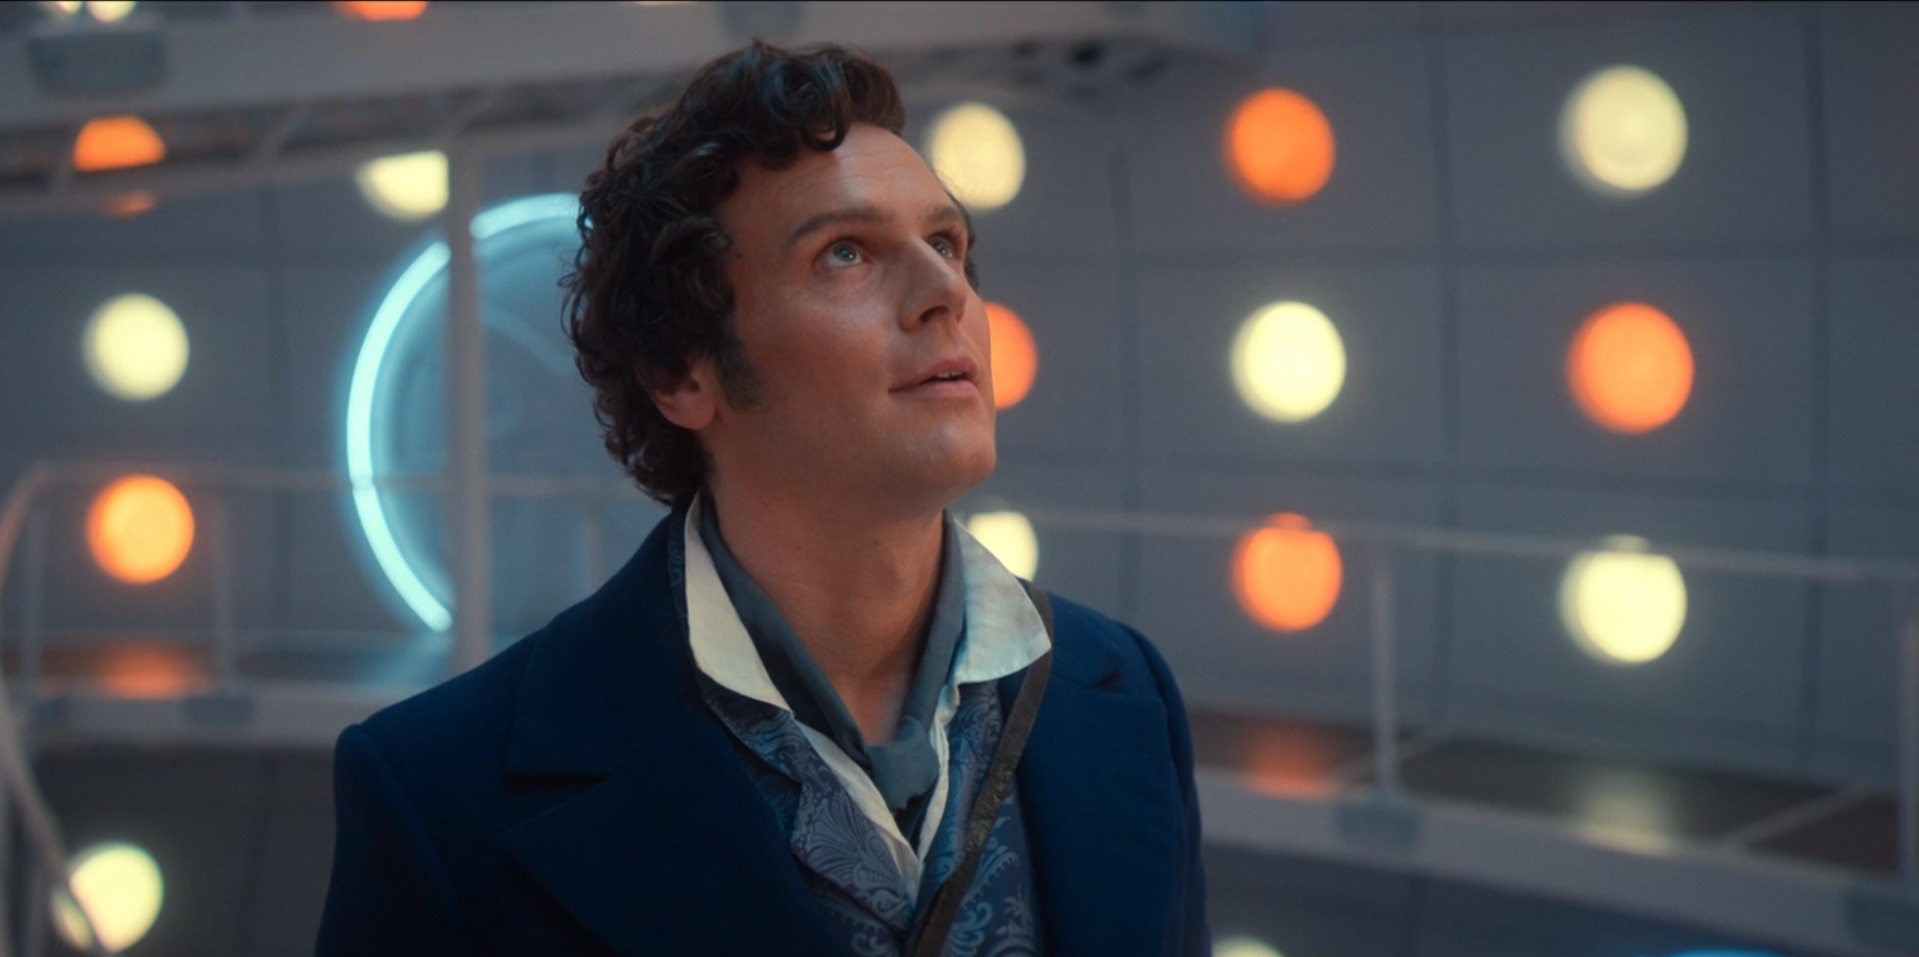 Rogue in the TARDIS. (TV: Rogue [+]Loading...["Rogue (TV story)"])